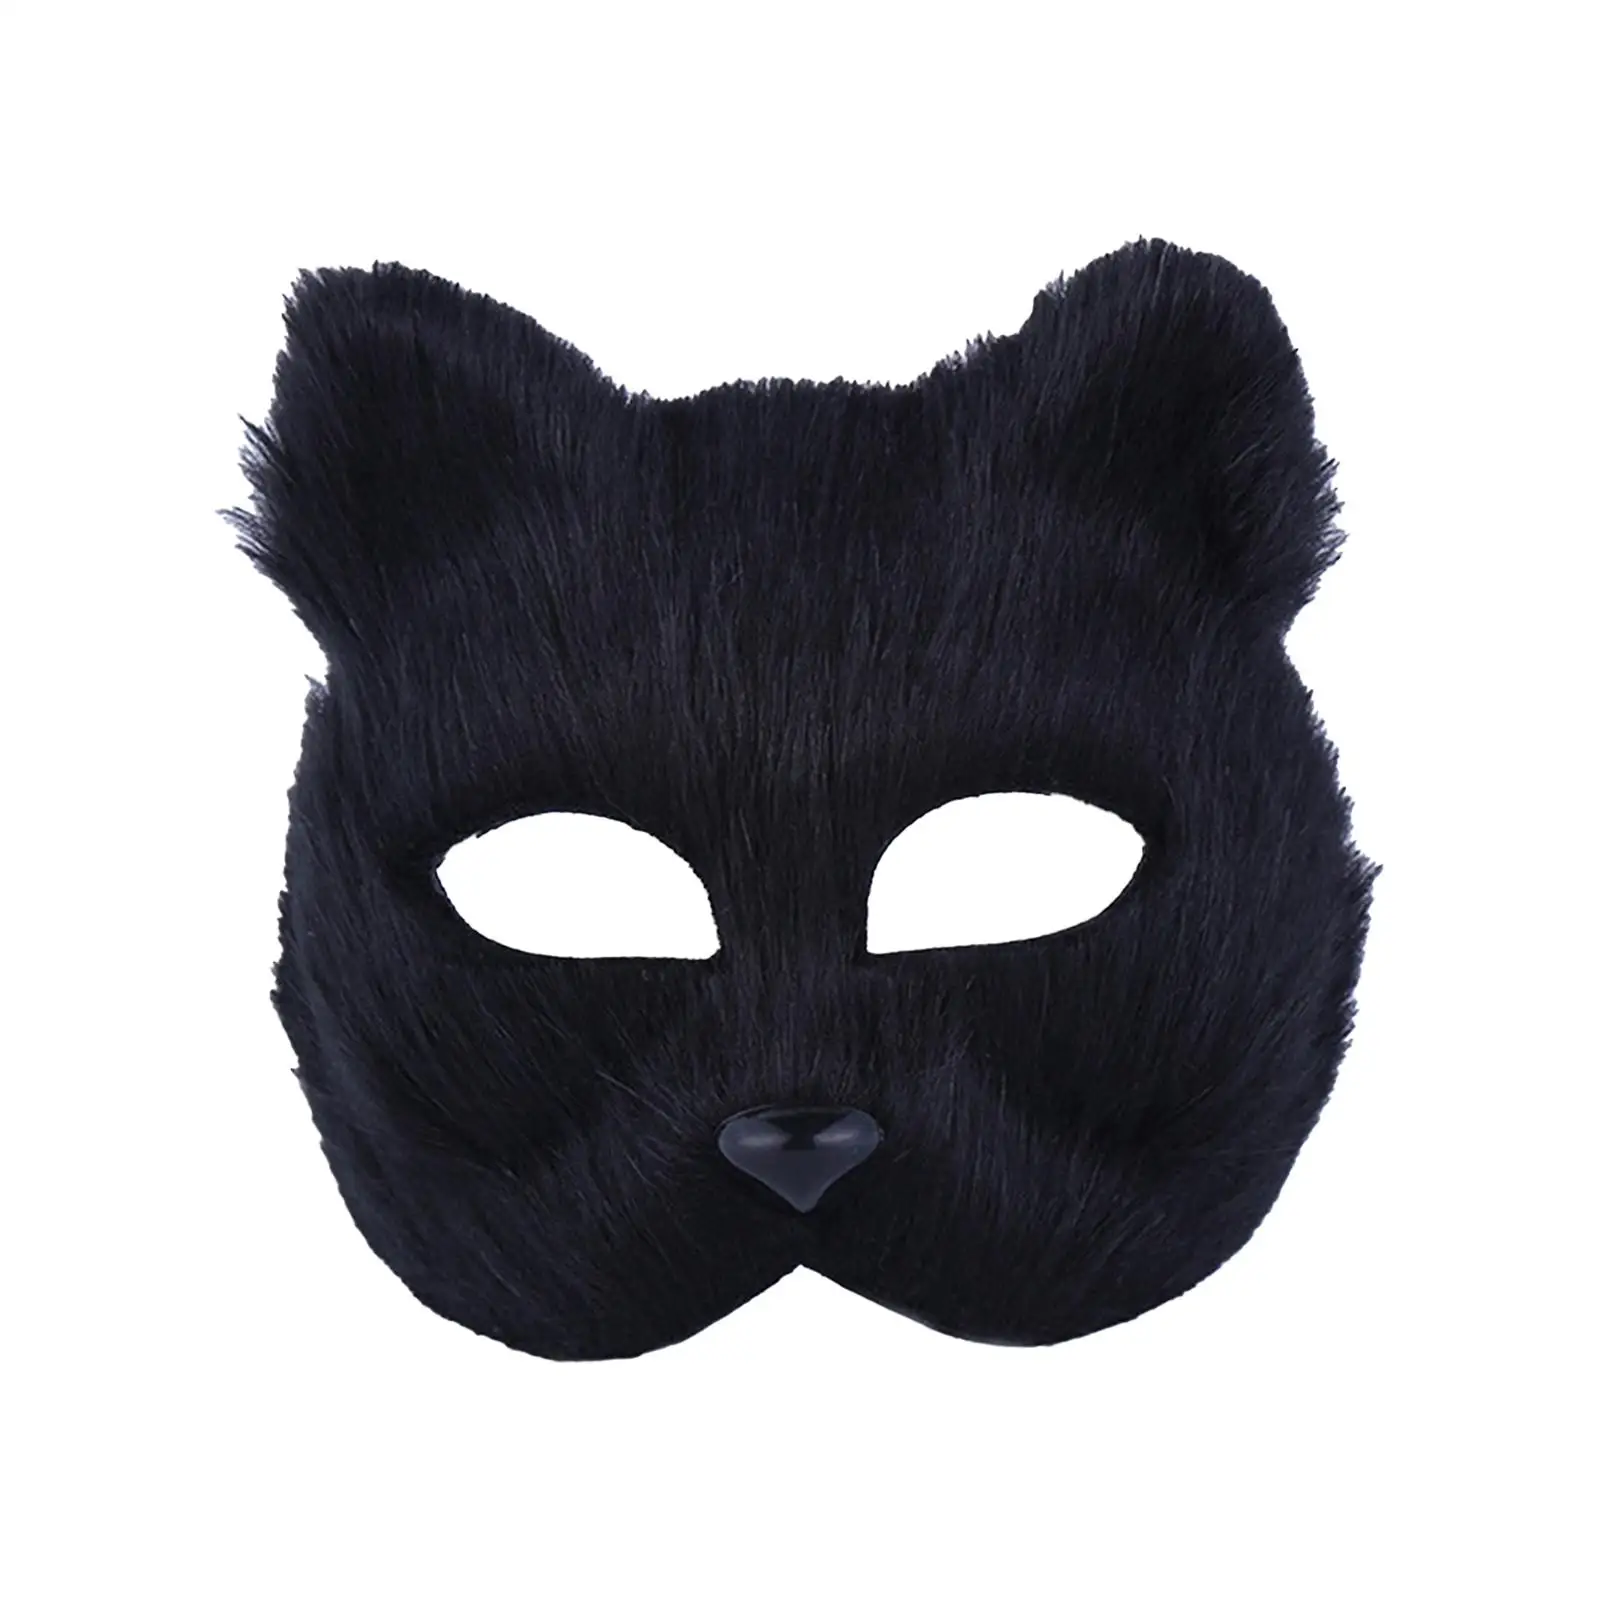 Furry Fox Mask Dress up Holiday Mardi Gras Mask Decoration Club Prom Mask Stage Performance Roles Play Funny Fox Halloween Mask